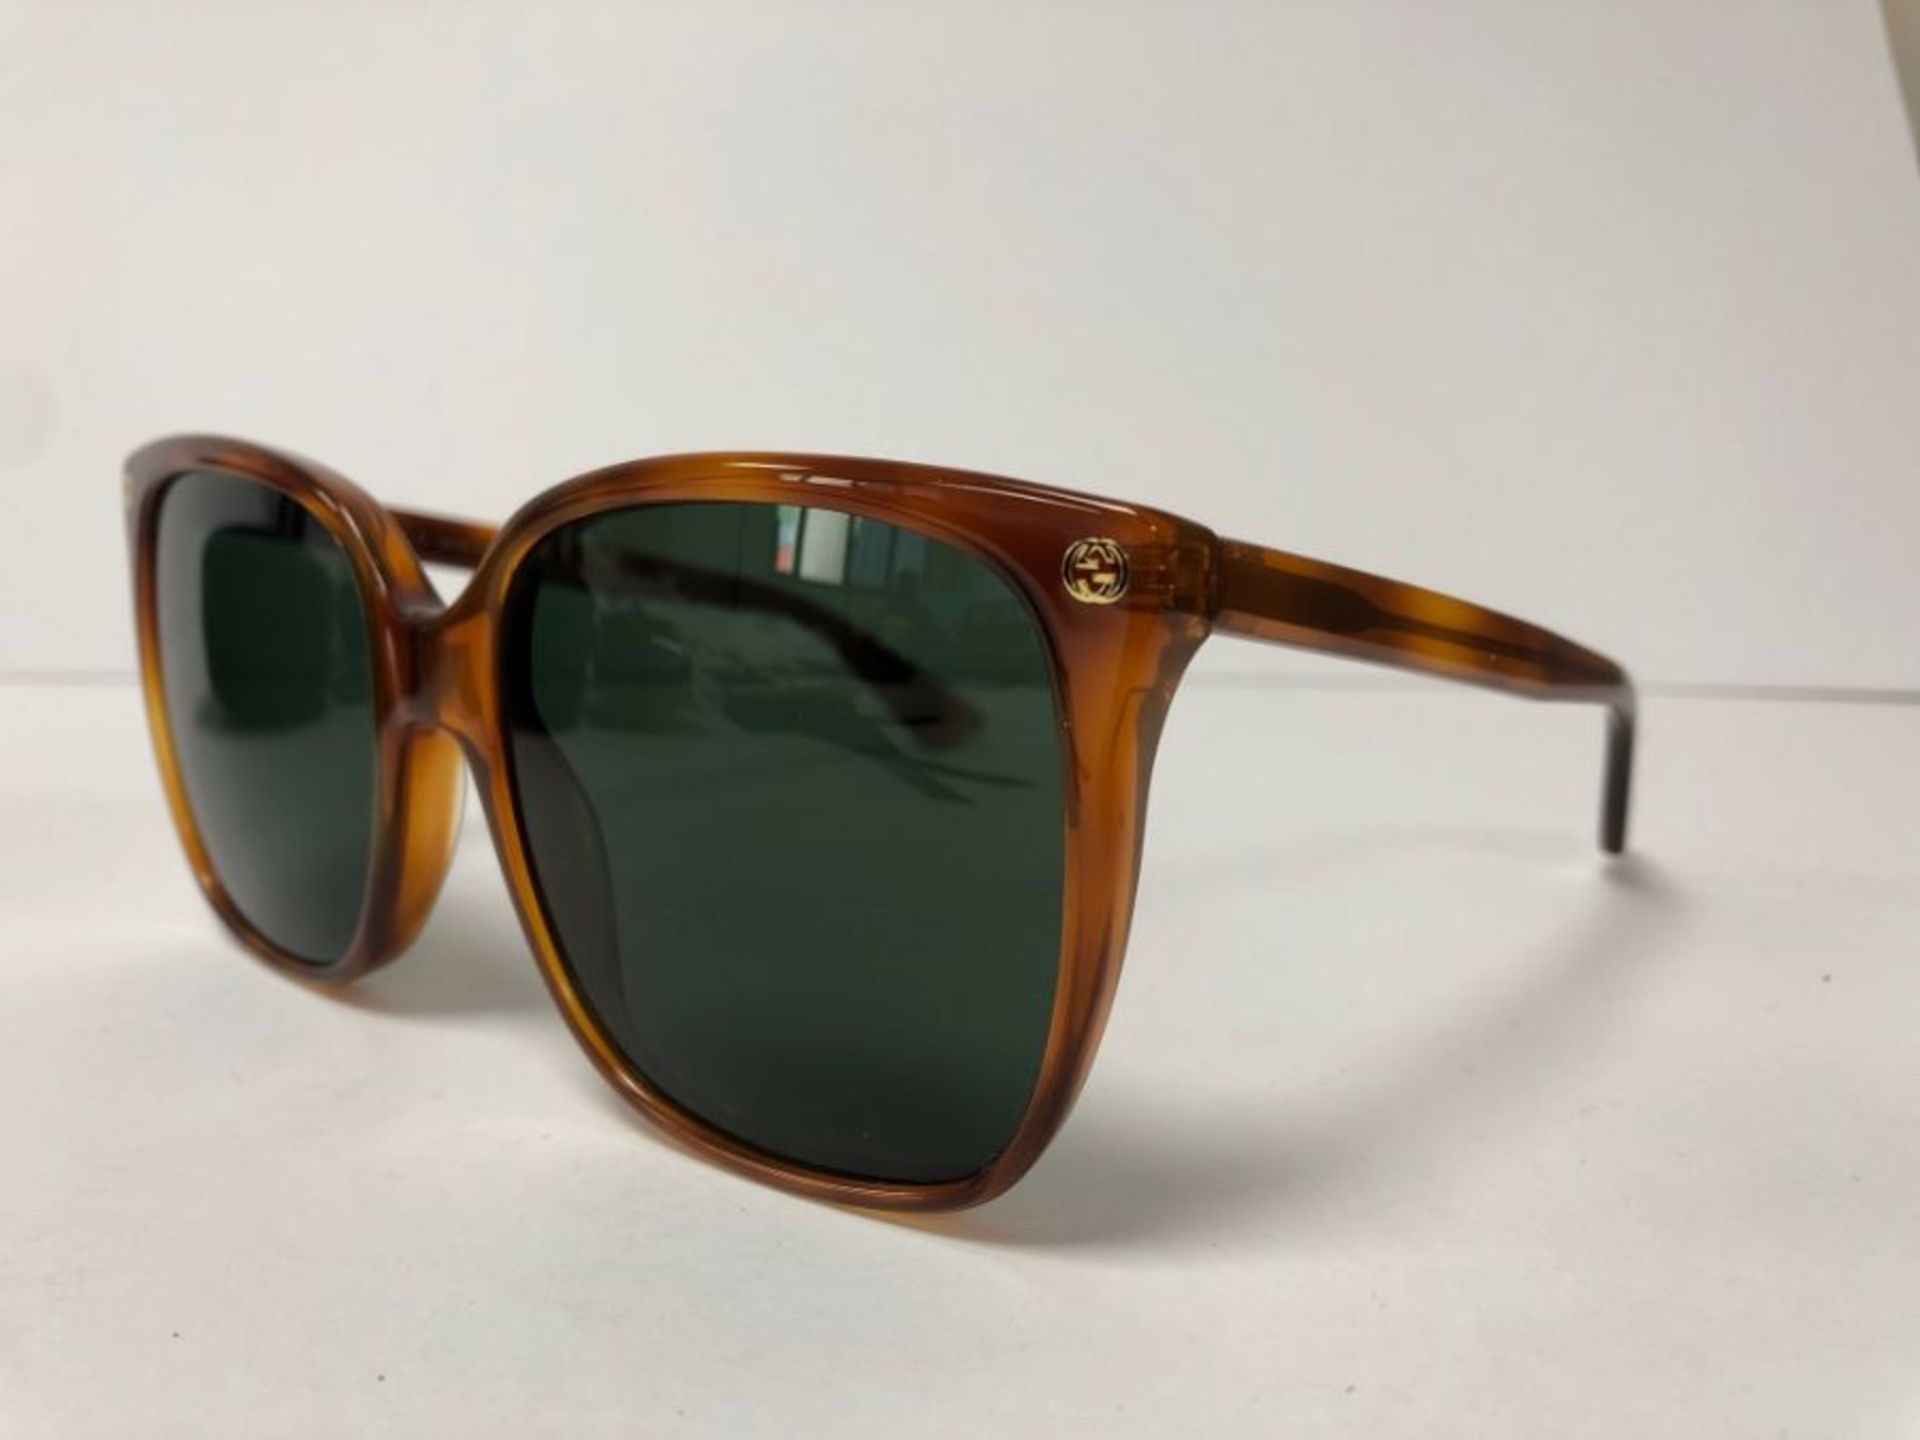 Gucci Men's Sunglasses, Mens, GG0689S Tortoise Shell with case - Image 6 of 7